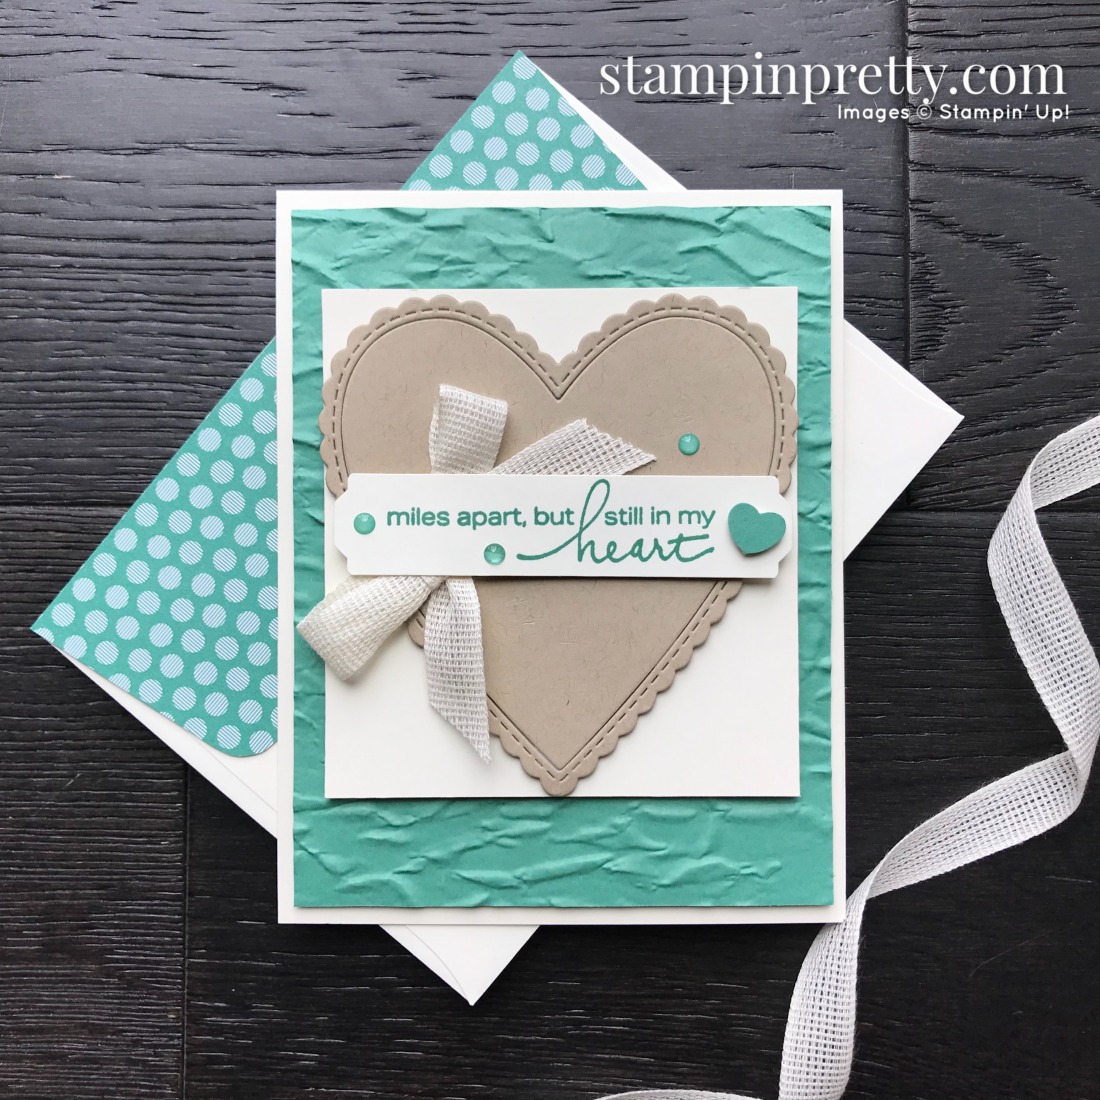 Create this card using the Lovely You Bundle from Stampin' Up! Card created by Mary Fish, Stampin' Pretty